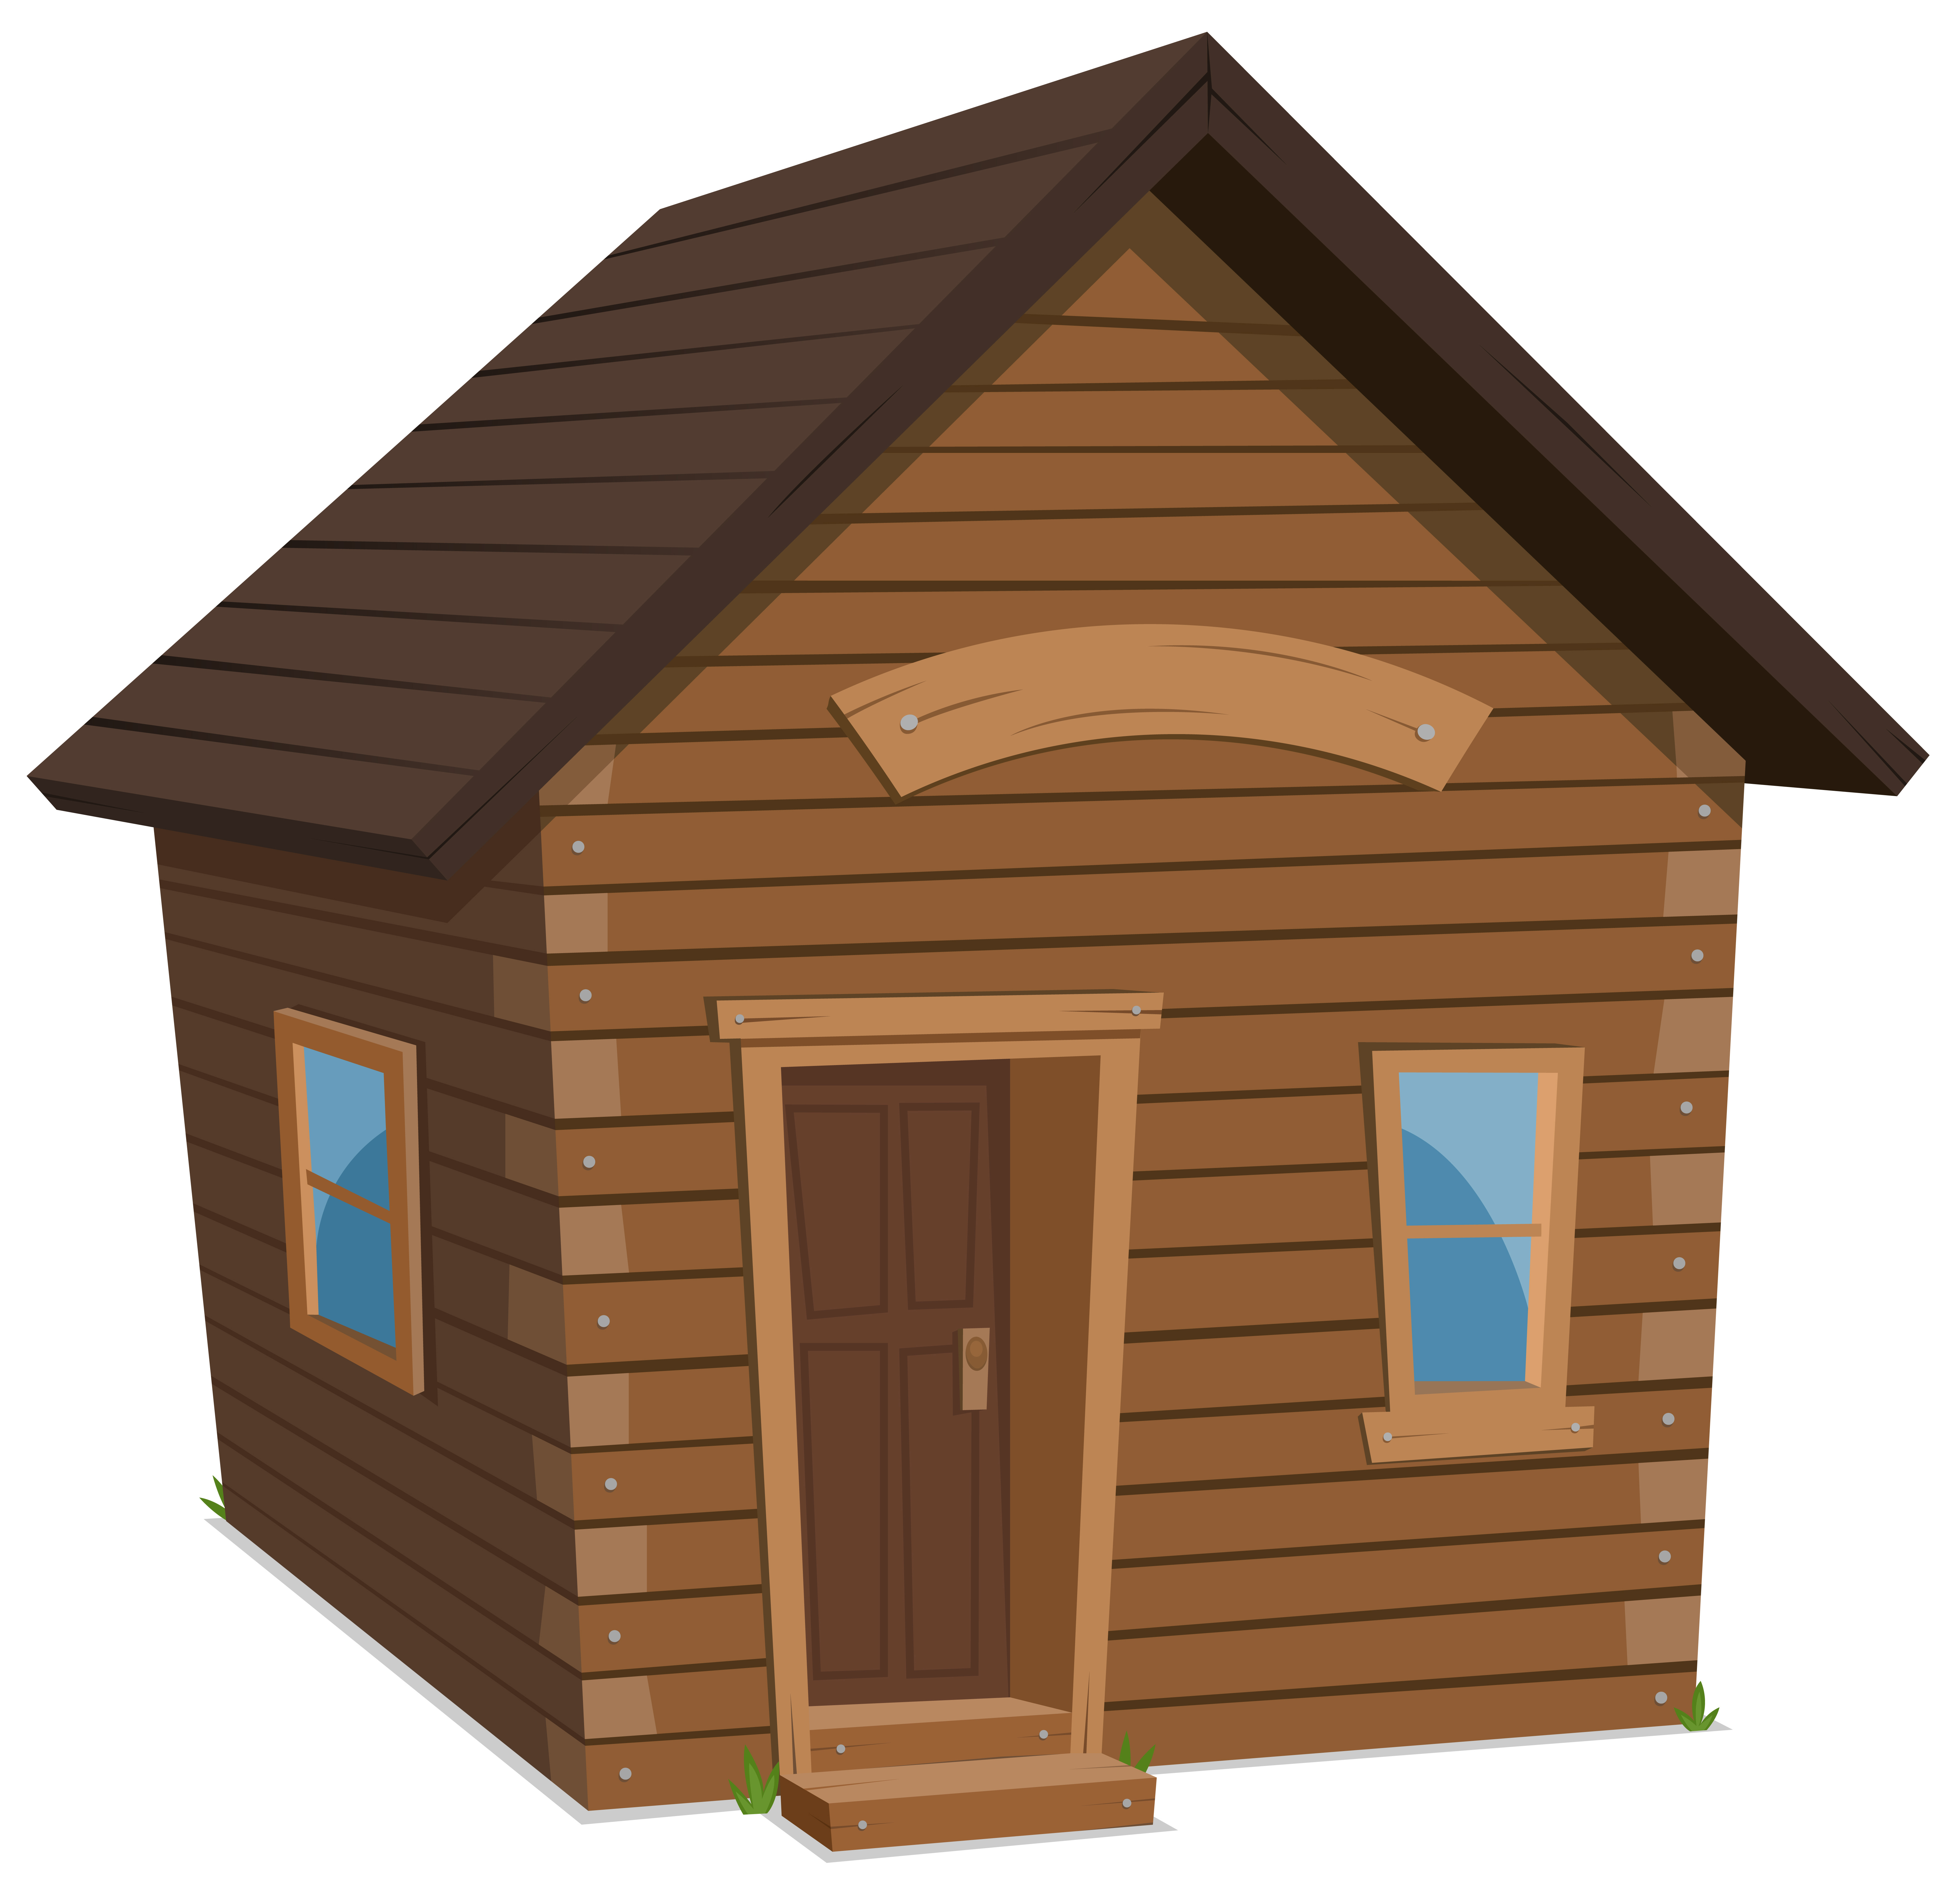 Wood House Lifestyle Download Free Vectors Clipart Graphics Vector Art